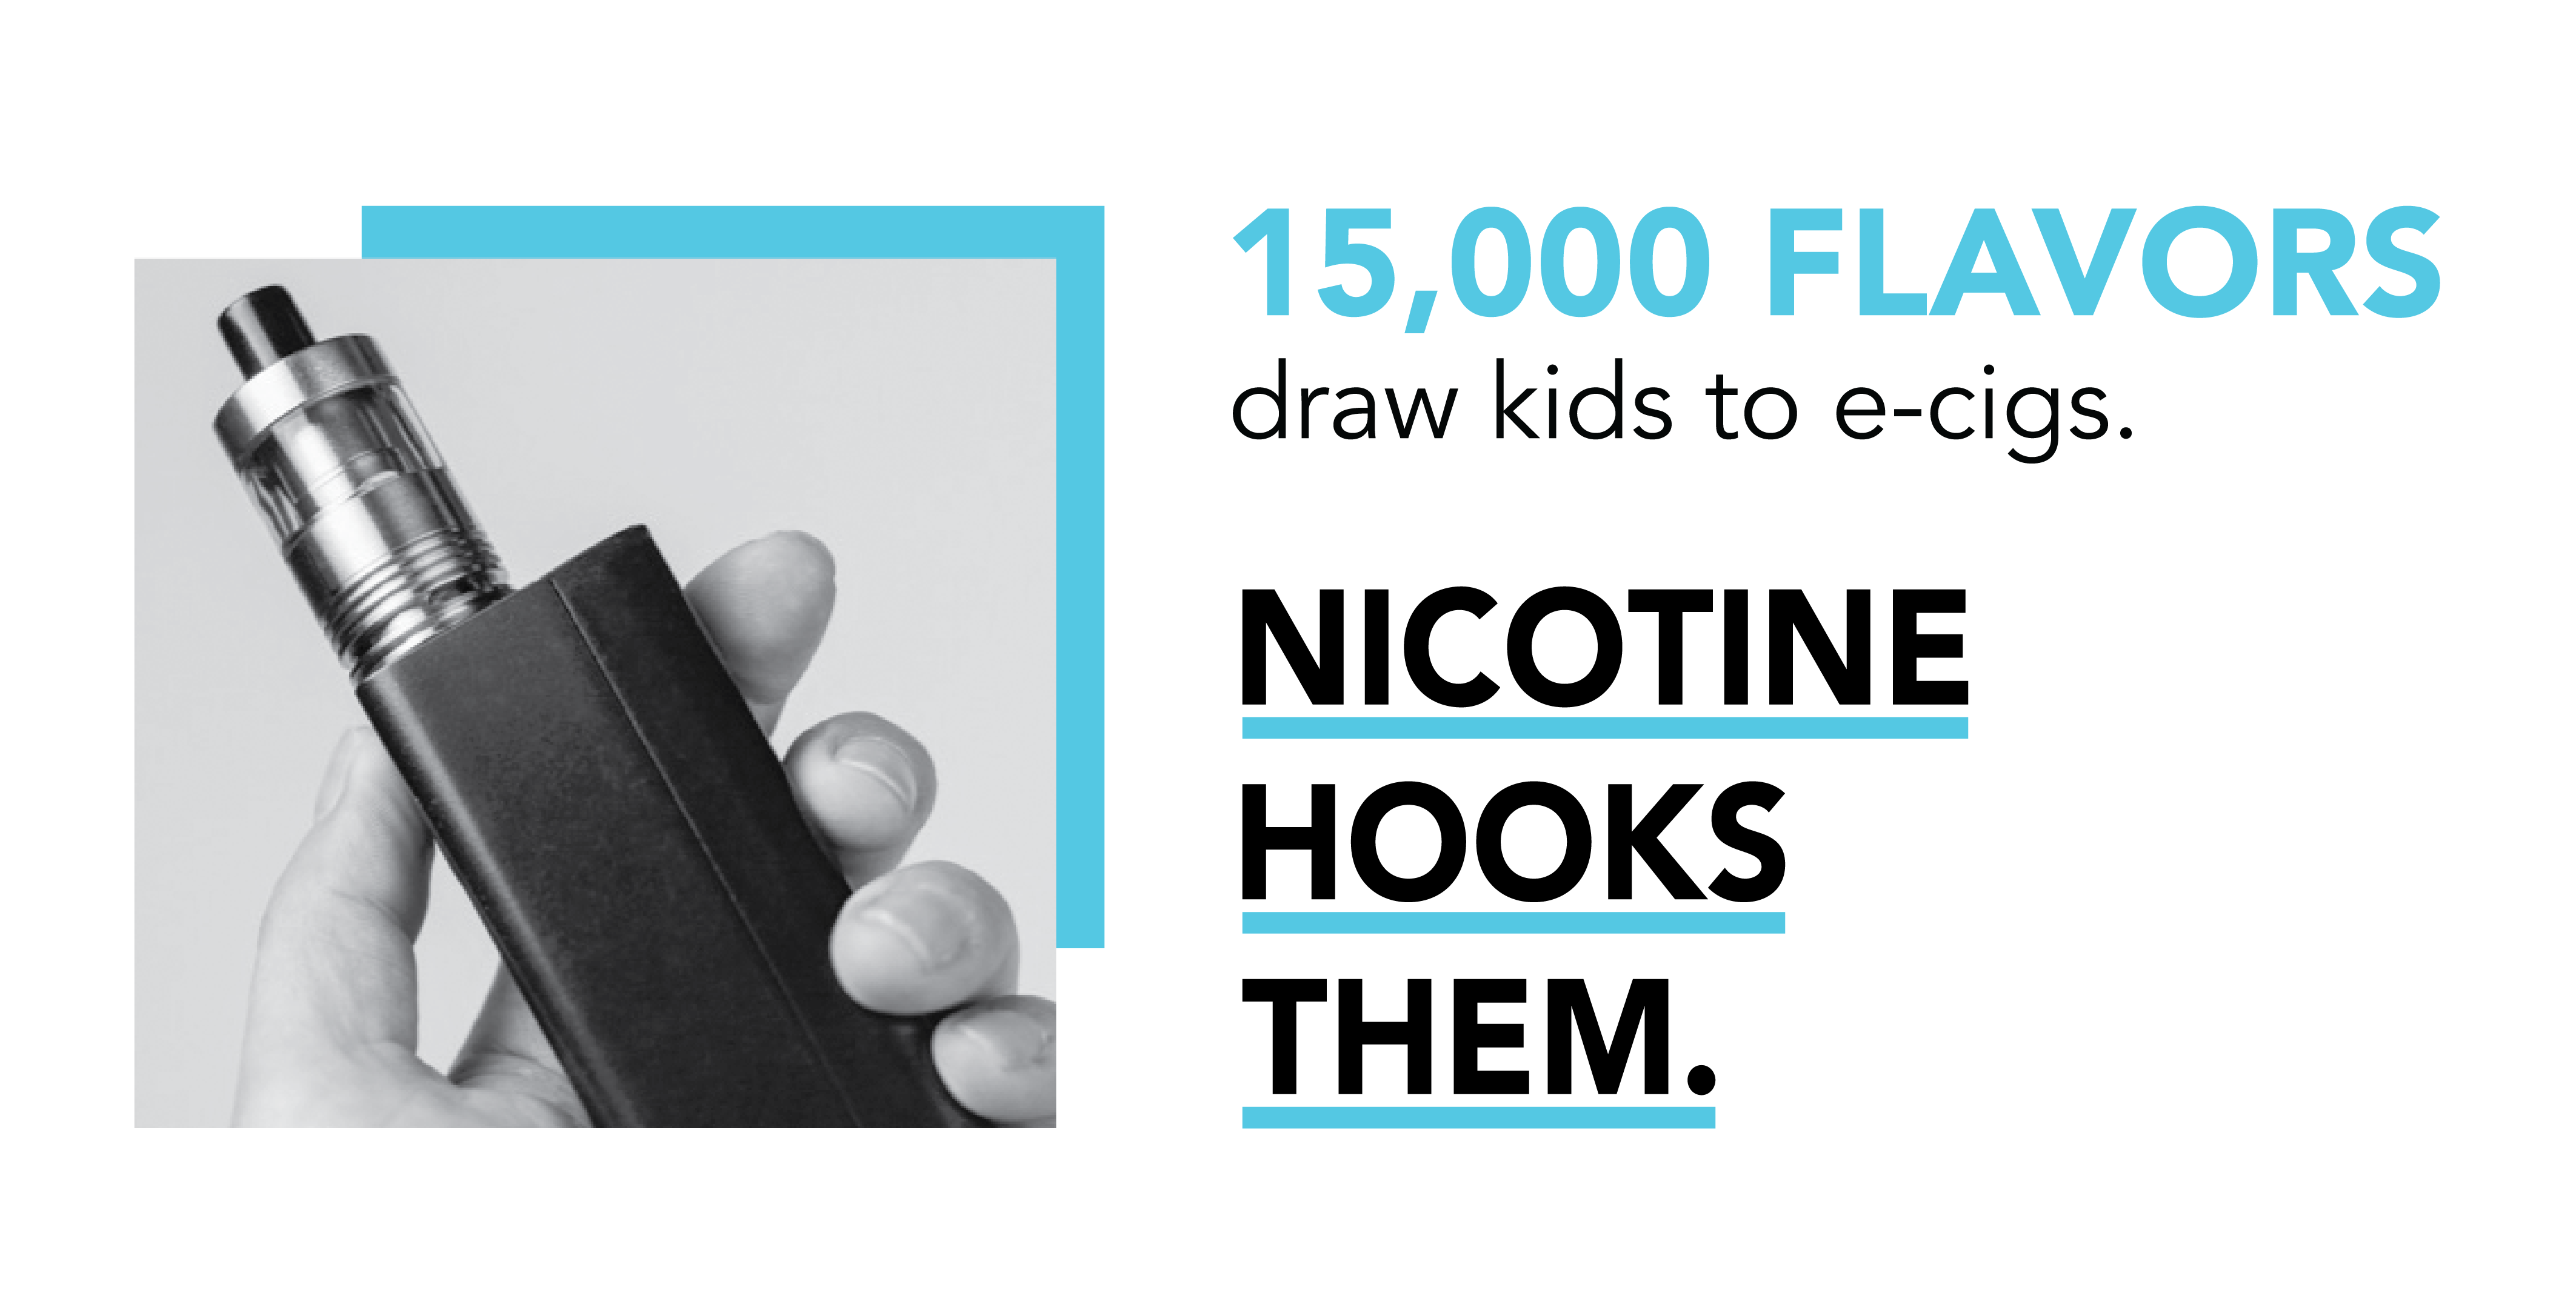 Campaign for tobacco-free kids protect kids from youth vaping